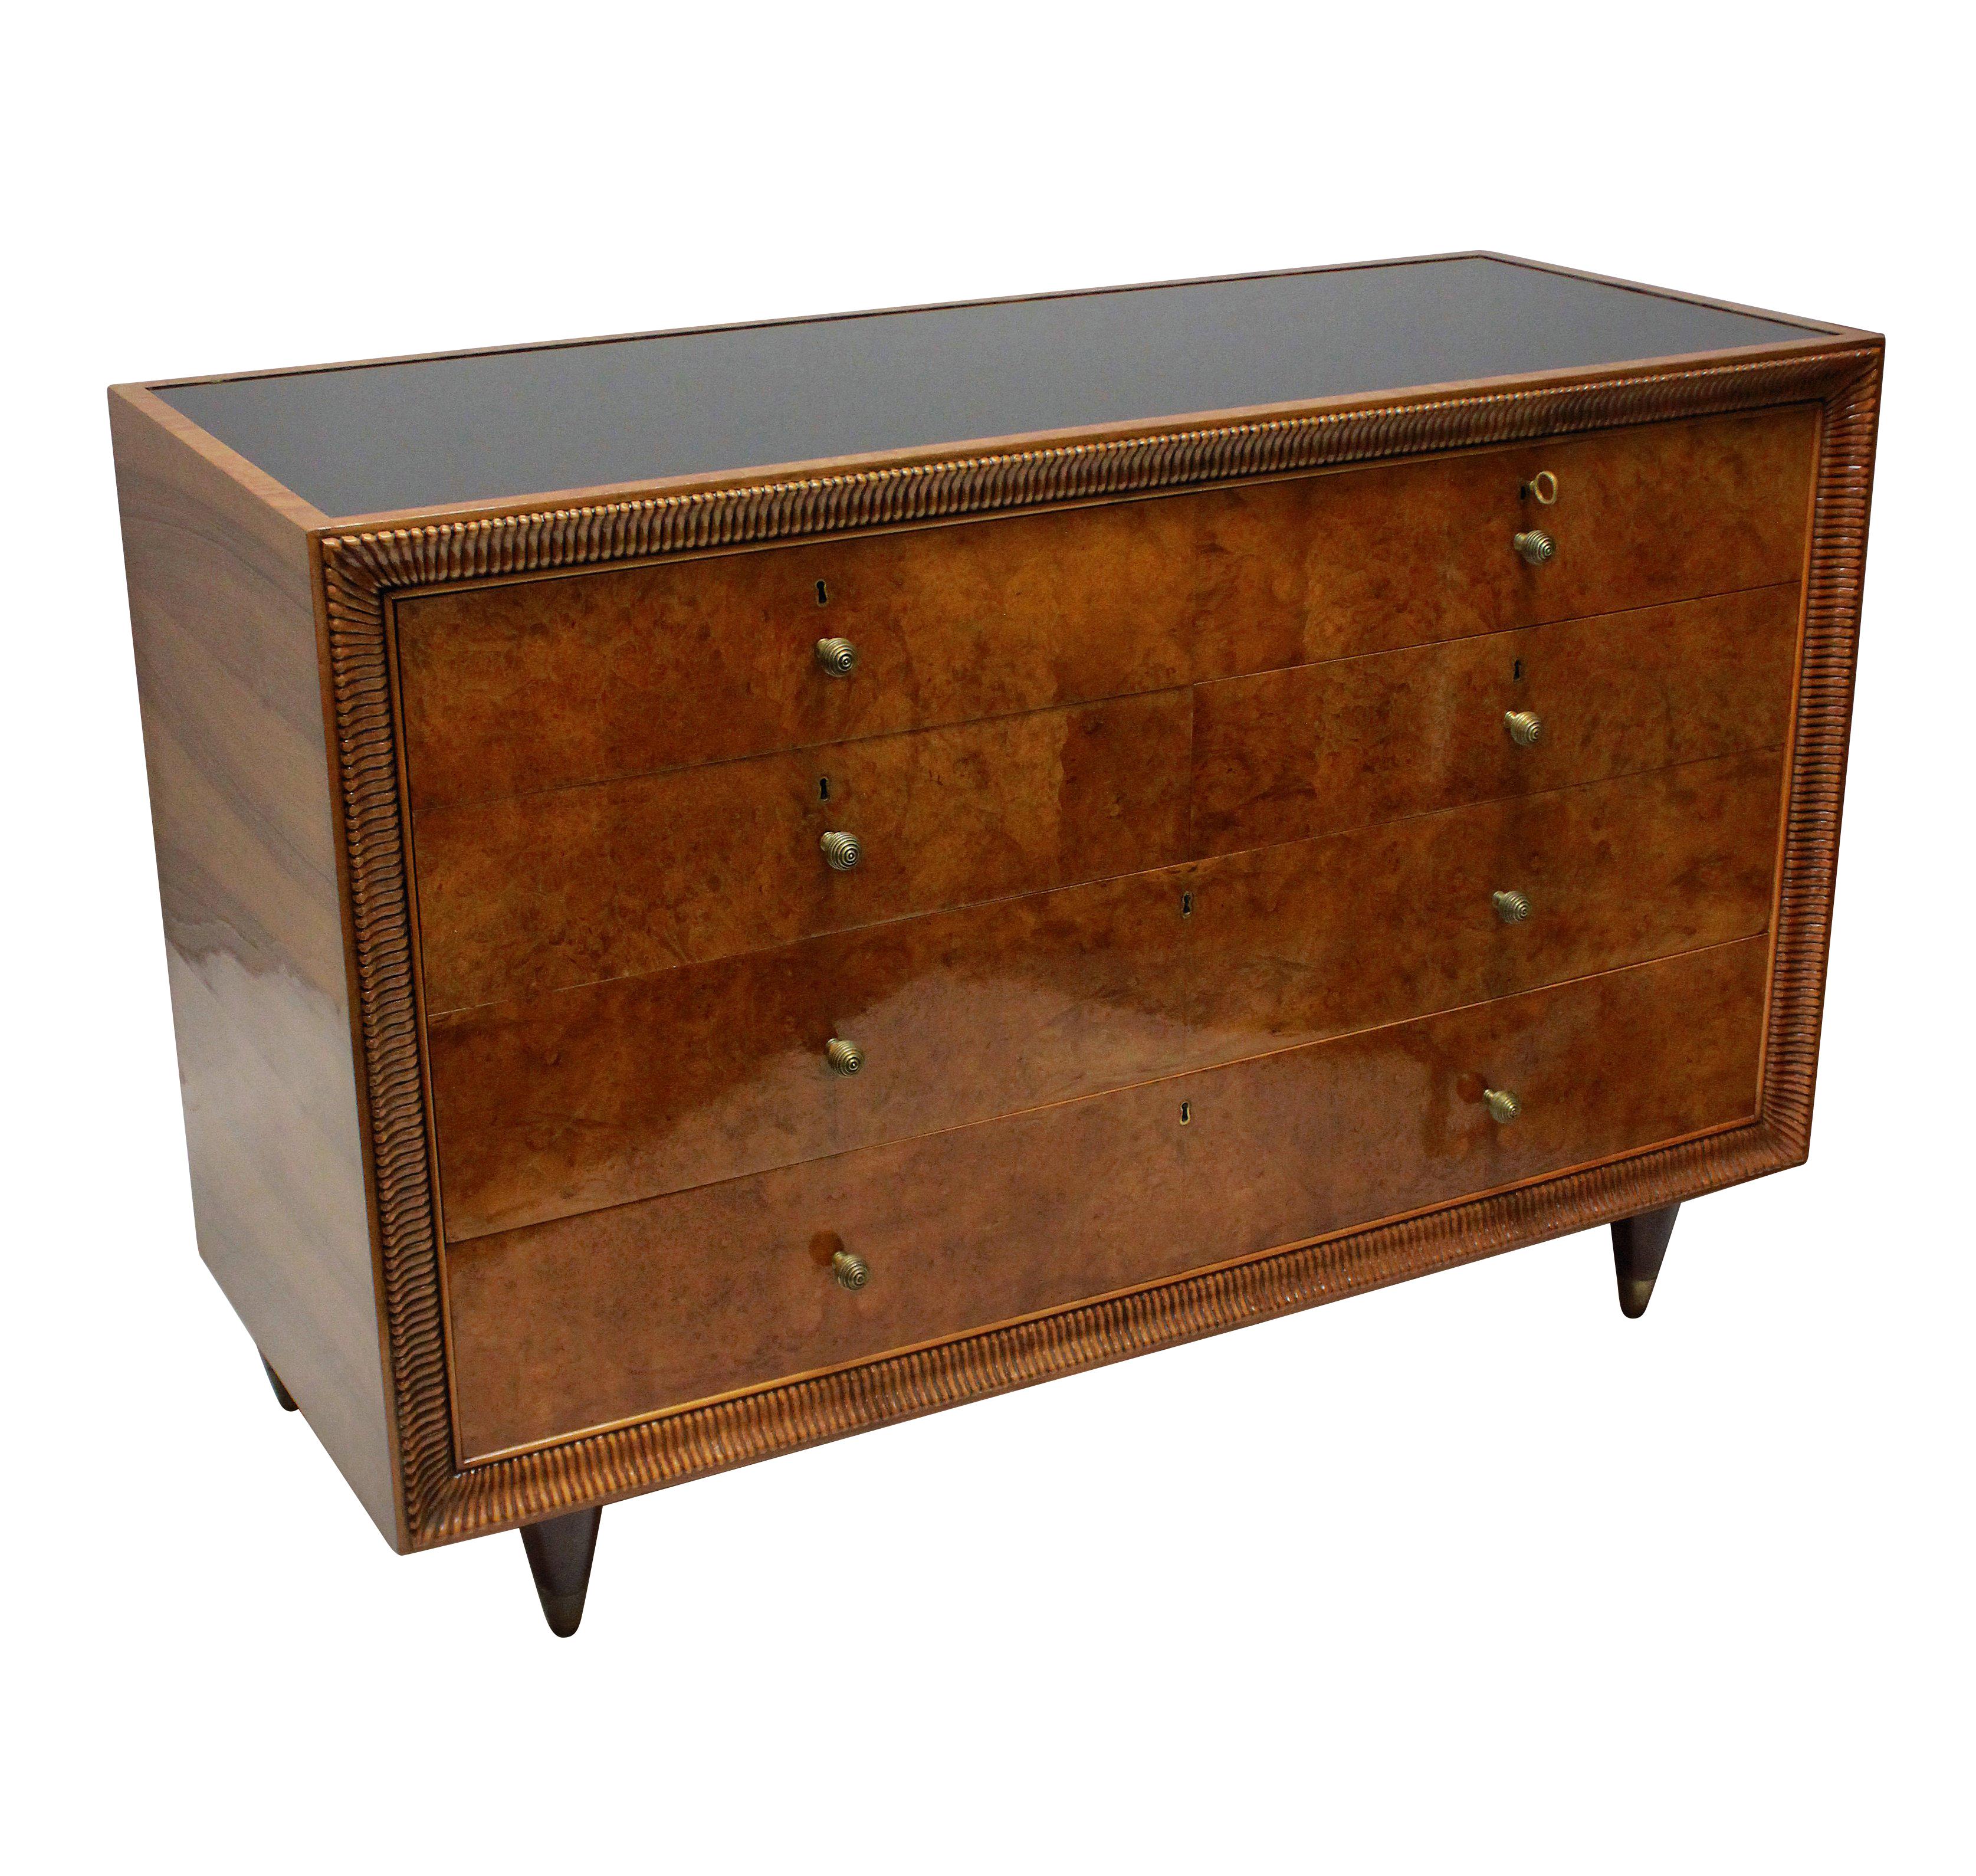 A large Italian commode of exceptional quality by Osvaldo Borsani. In lacquered bur walnut, with brass beehive handles, six lockable drawers and its original black glass inset top. The deeply carved frieze around the front of the piece is typical of